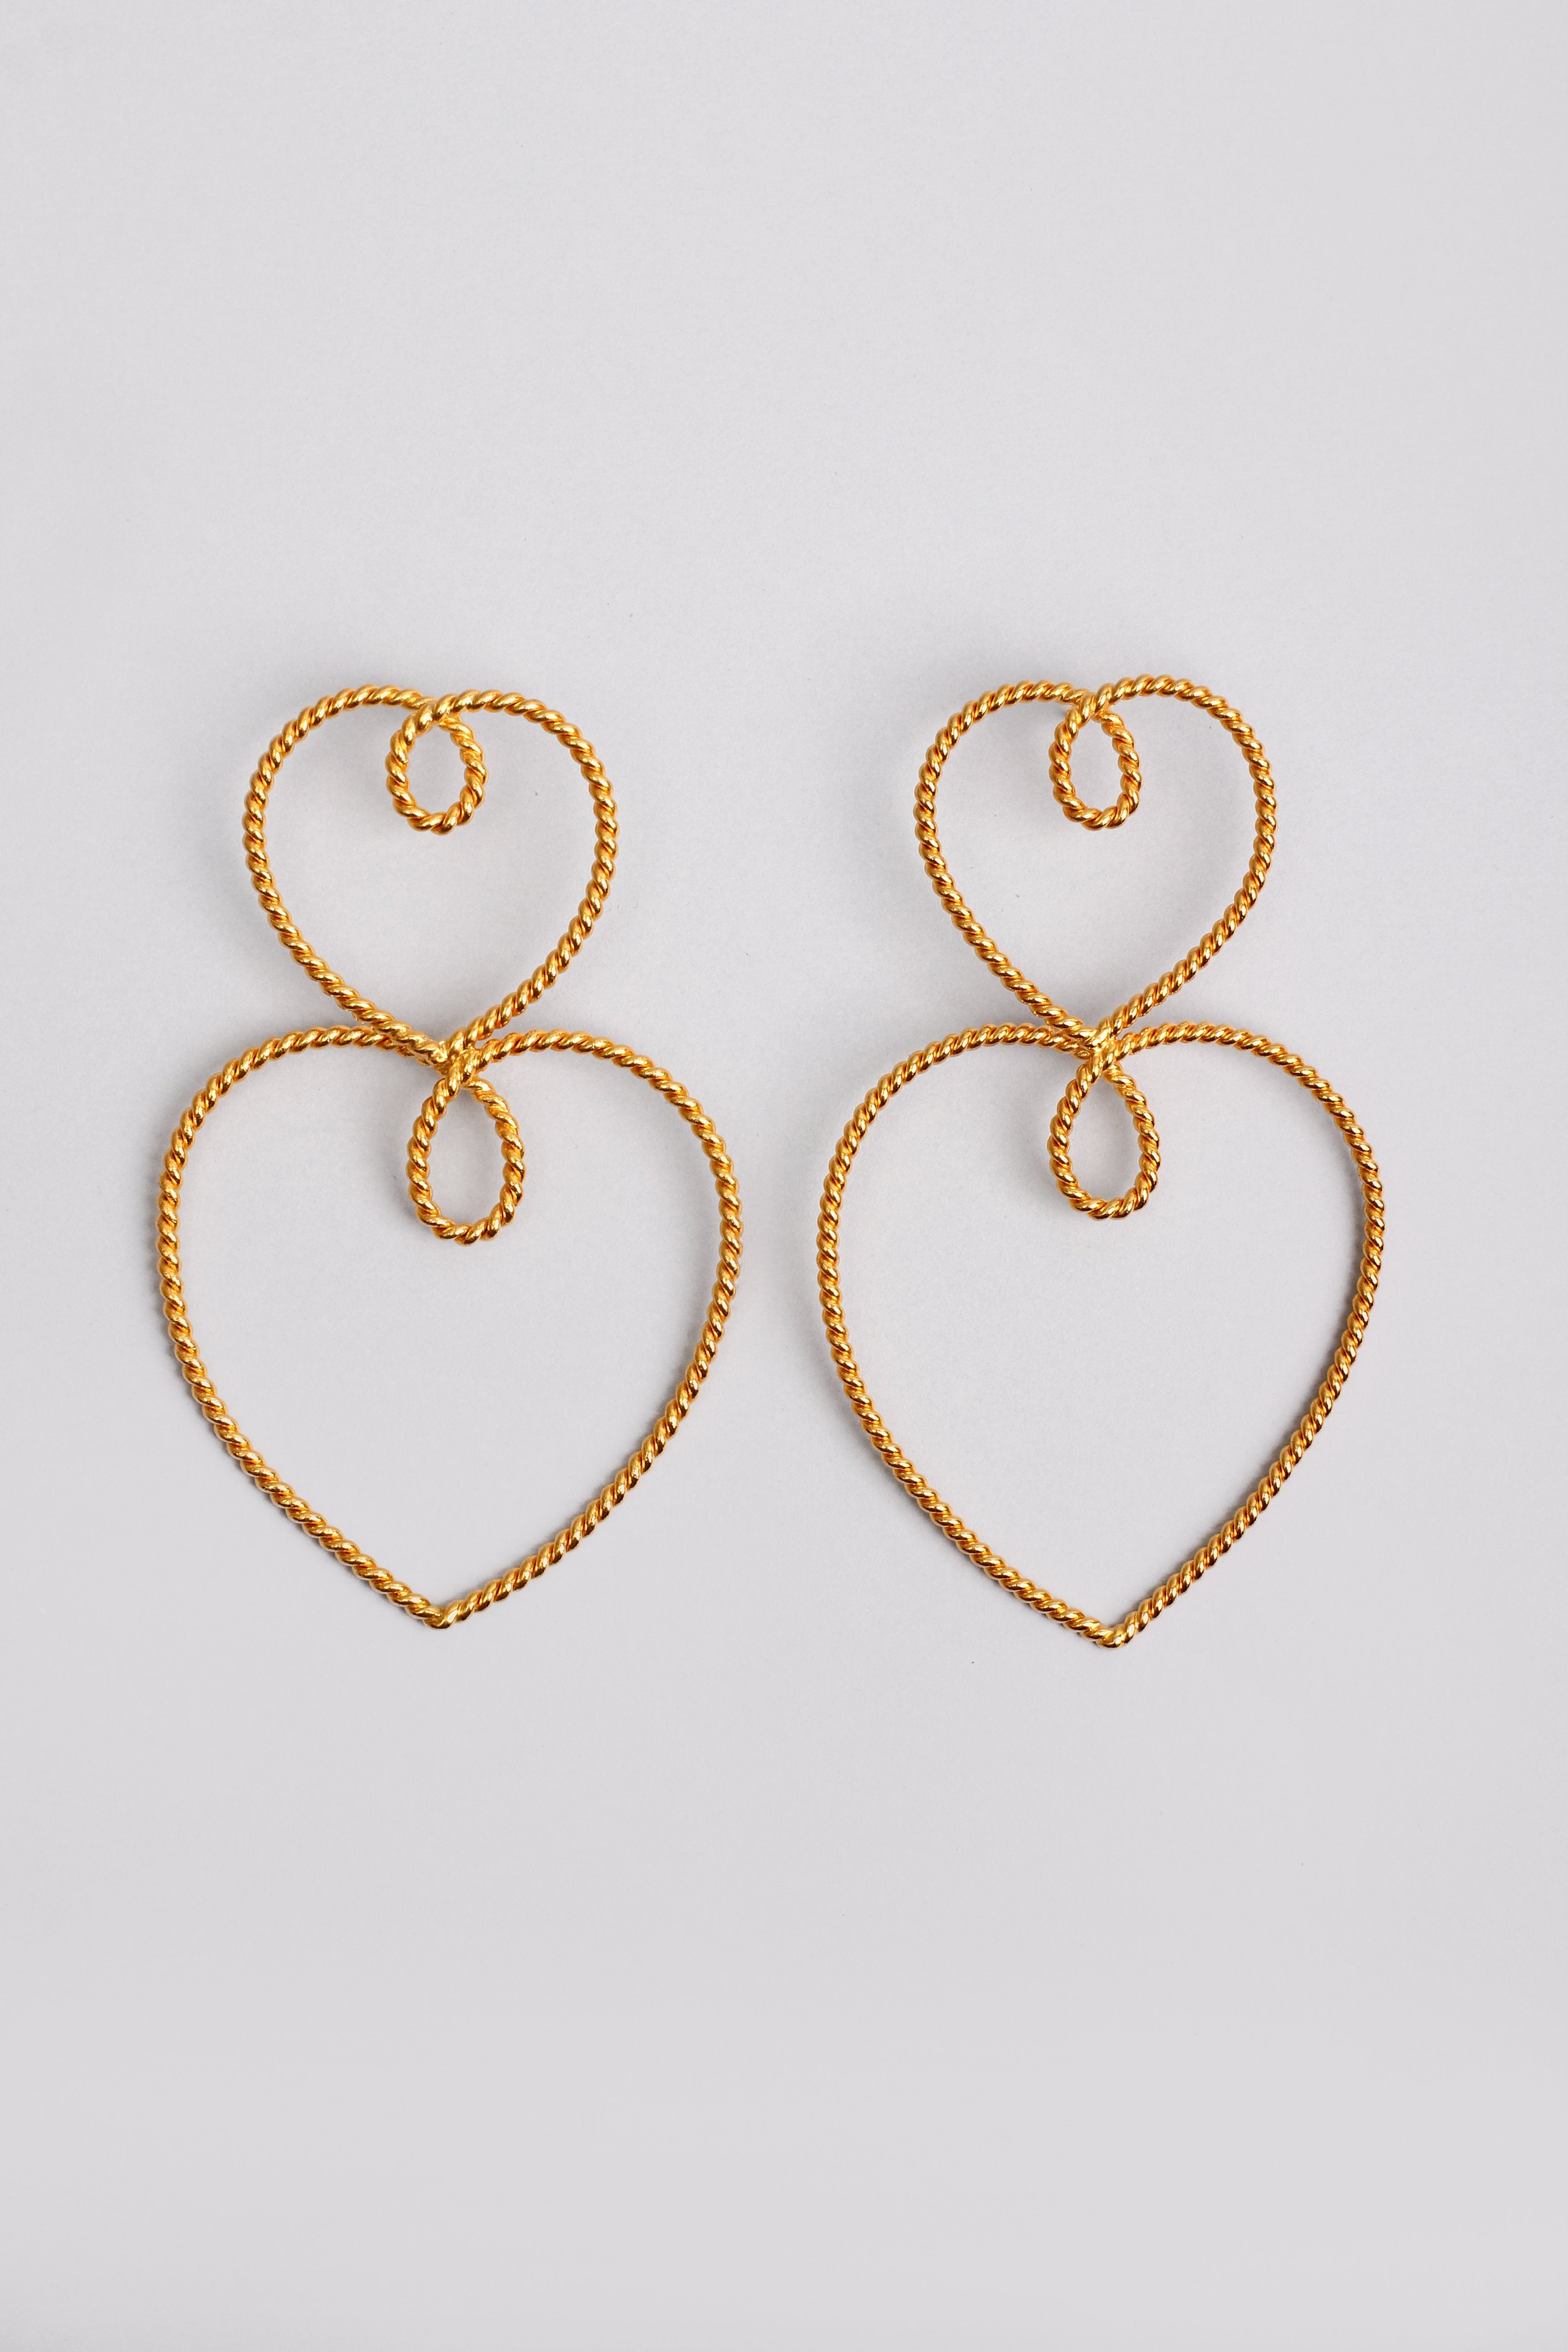 The Double Heart of Gold Earrings